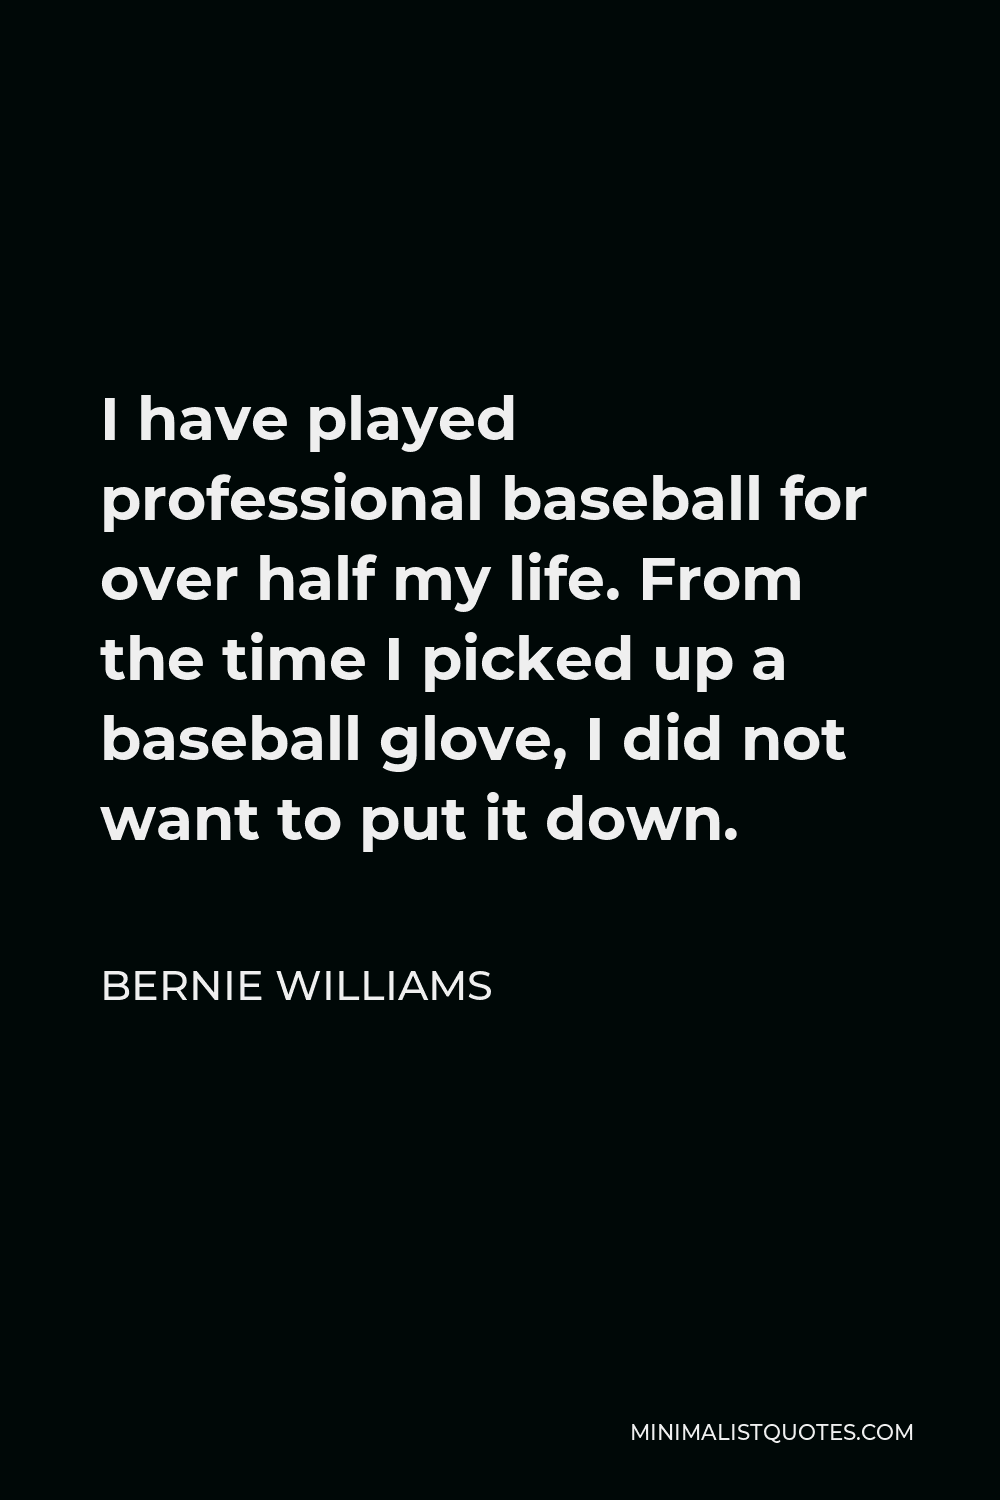 Bernie Williams Quote - I have played professional baseball for over half my life. From the time I picked up a baseball glove, I did not want to put it down.